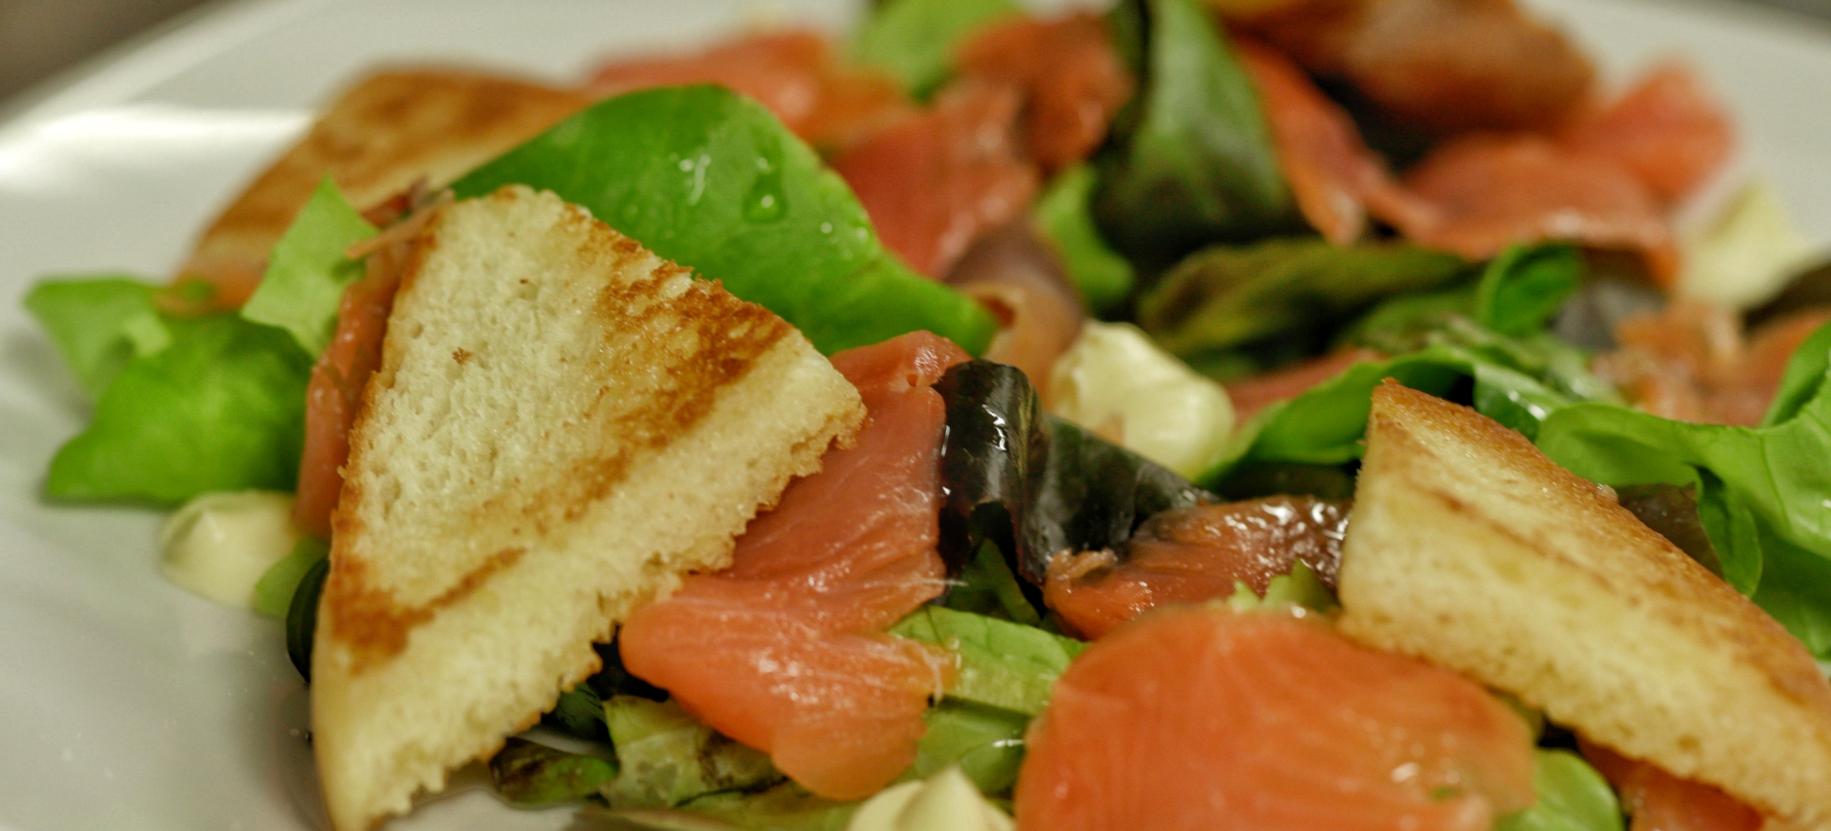 Salad with smoked trout